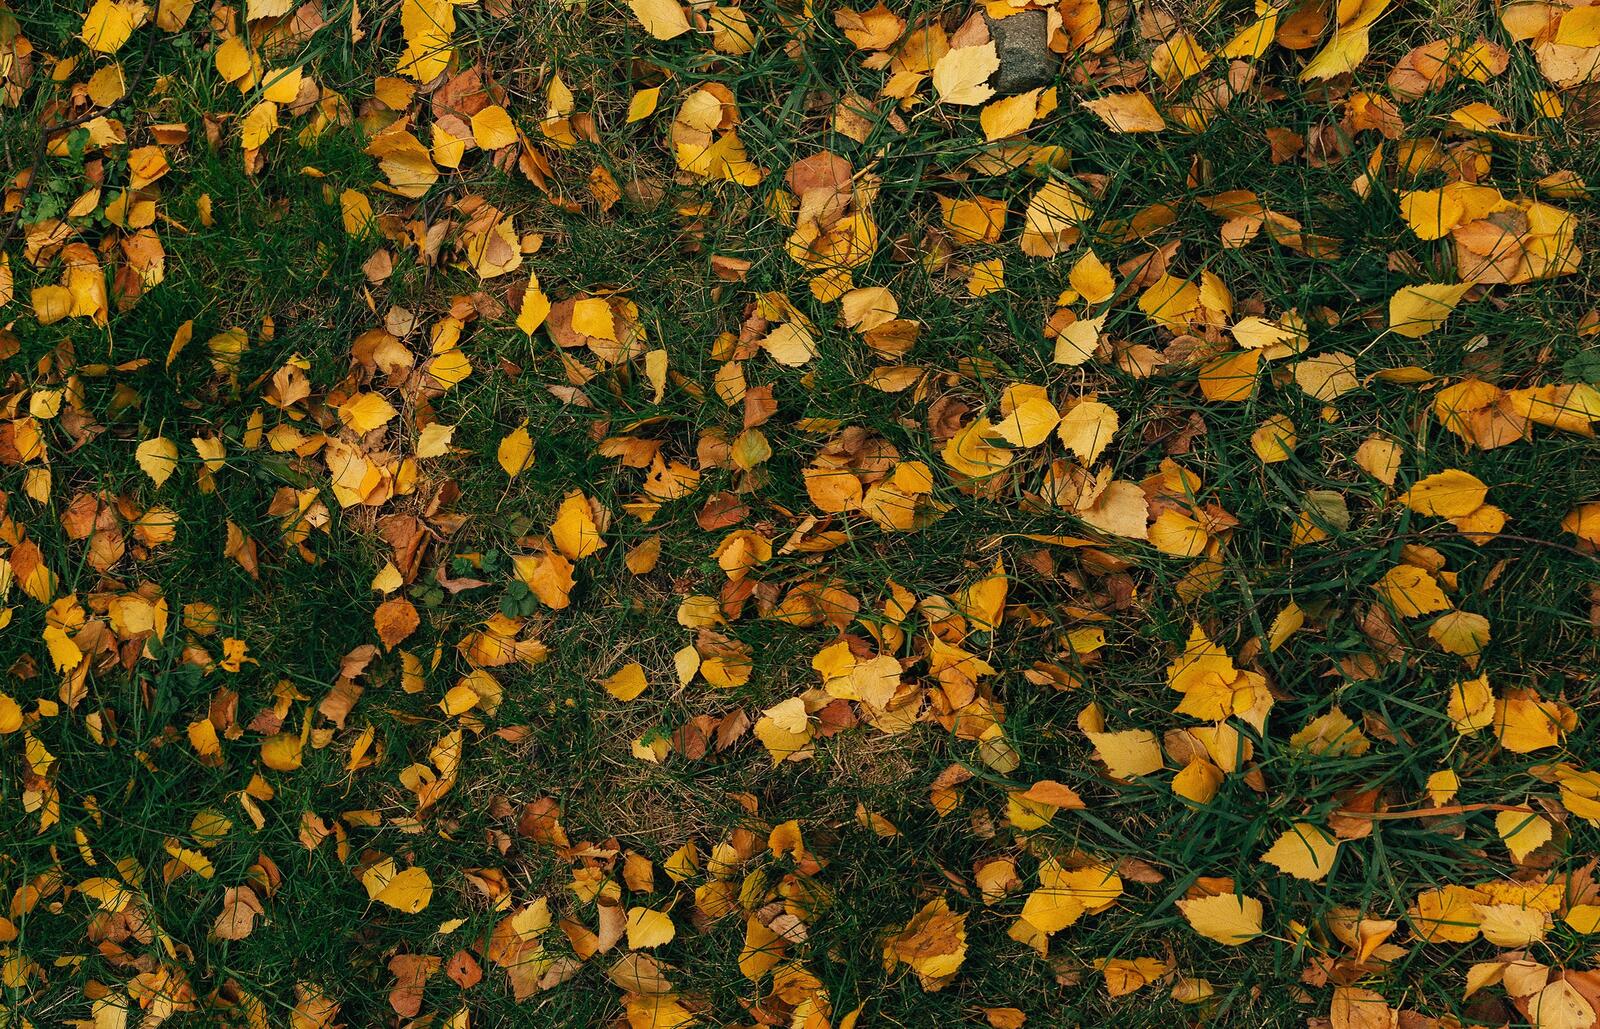 Free photo Green grass with fallen autumn leaves of yellow color